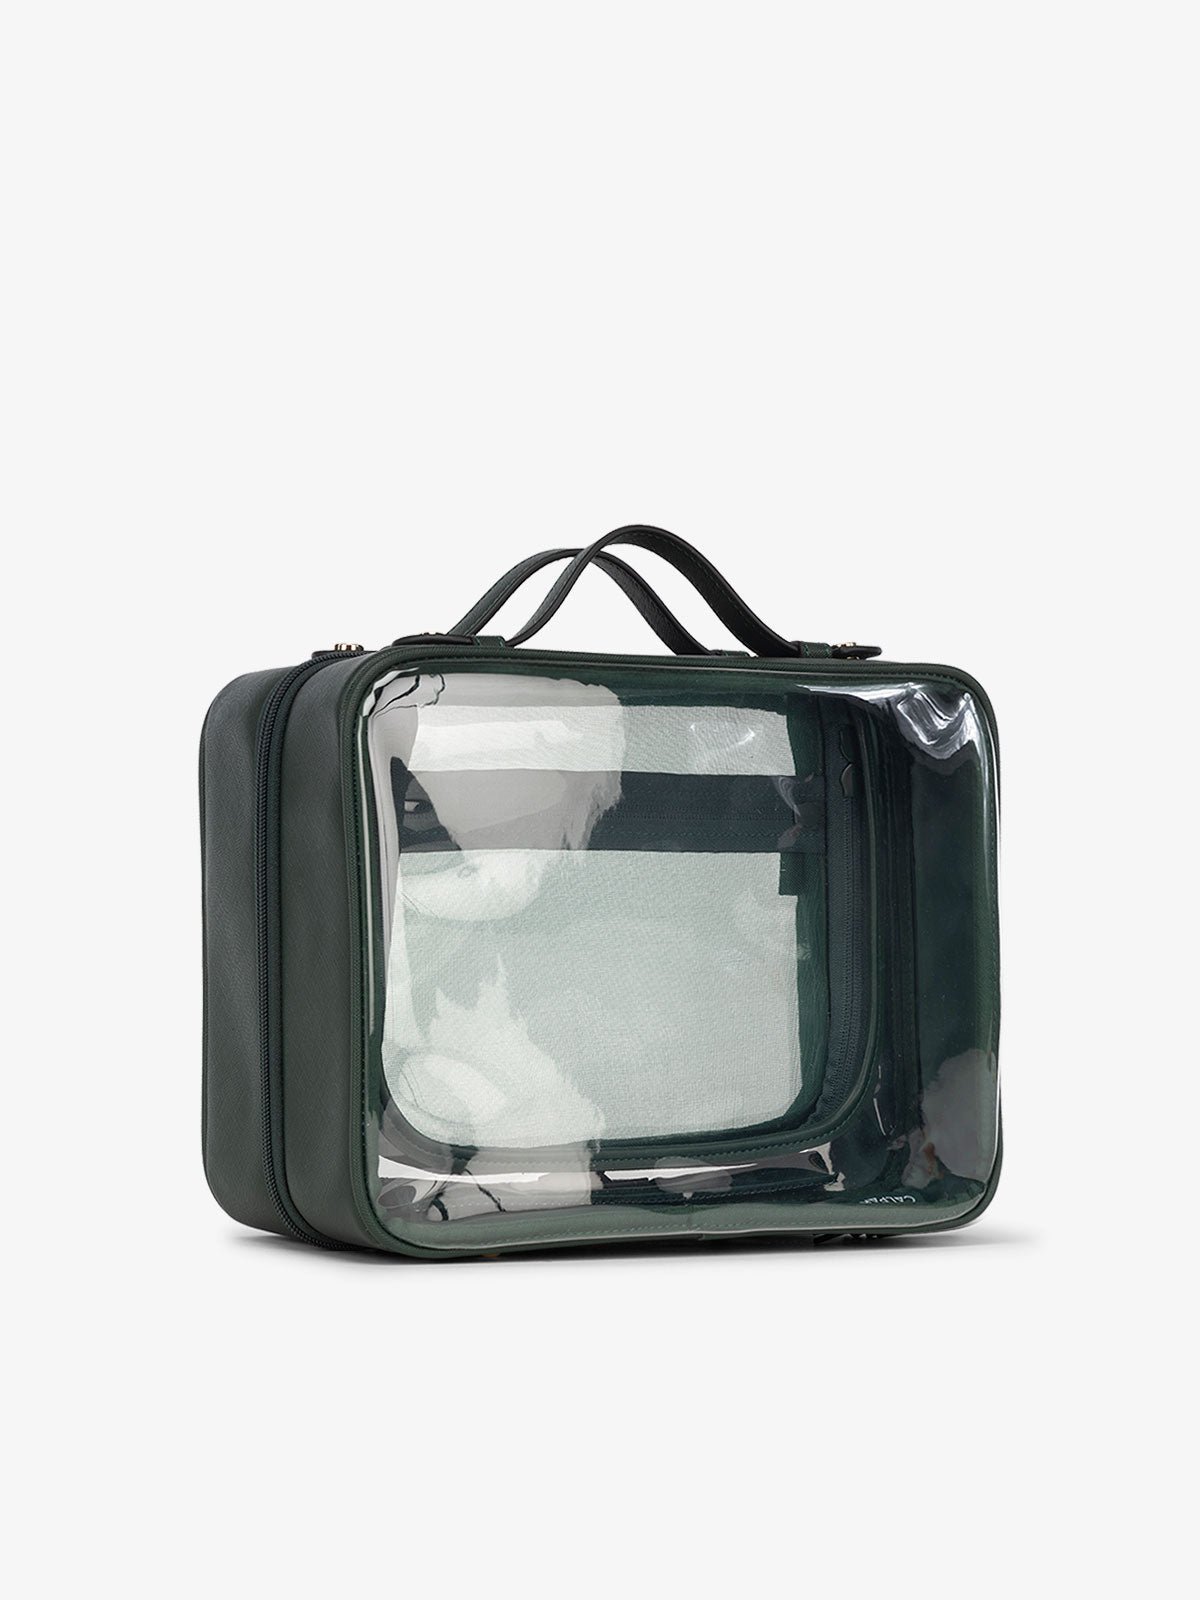 CALPAK clear case with dual handles and mesh interior compartment in emerald